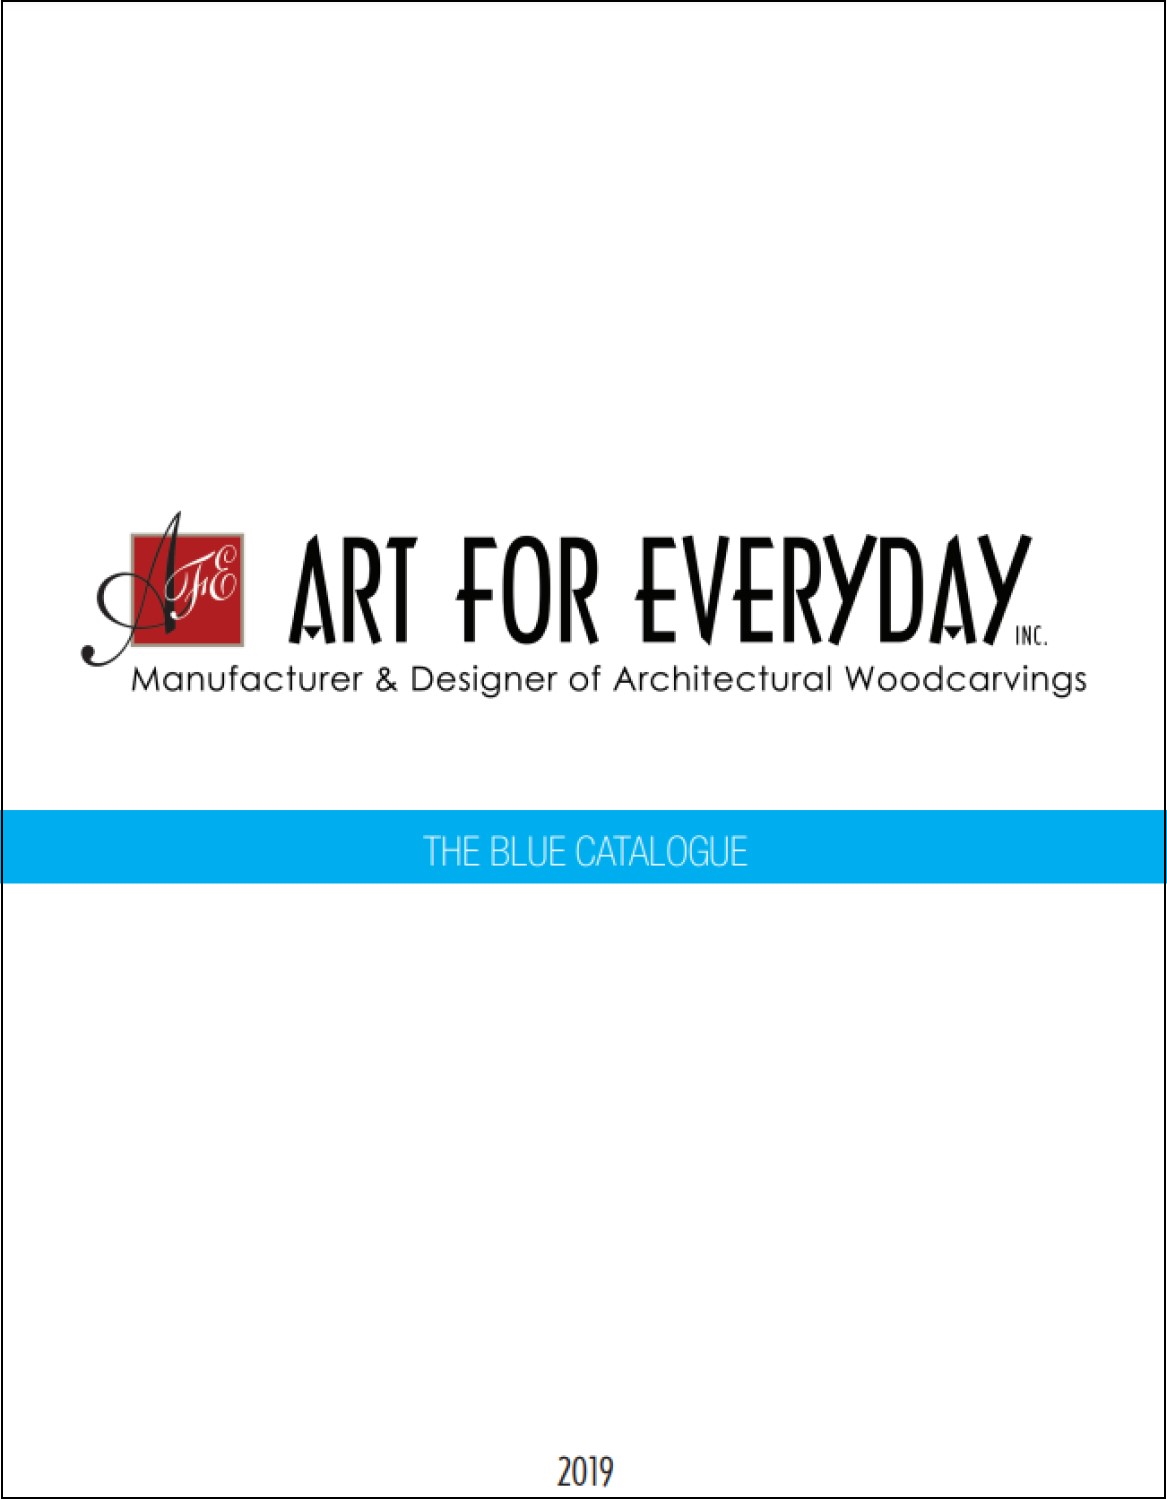 Image Blue Catalogue - Art For Everyday